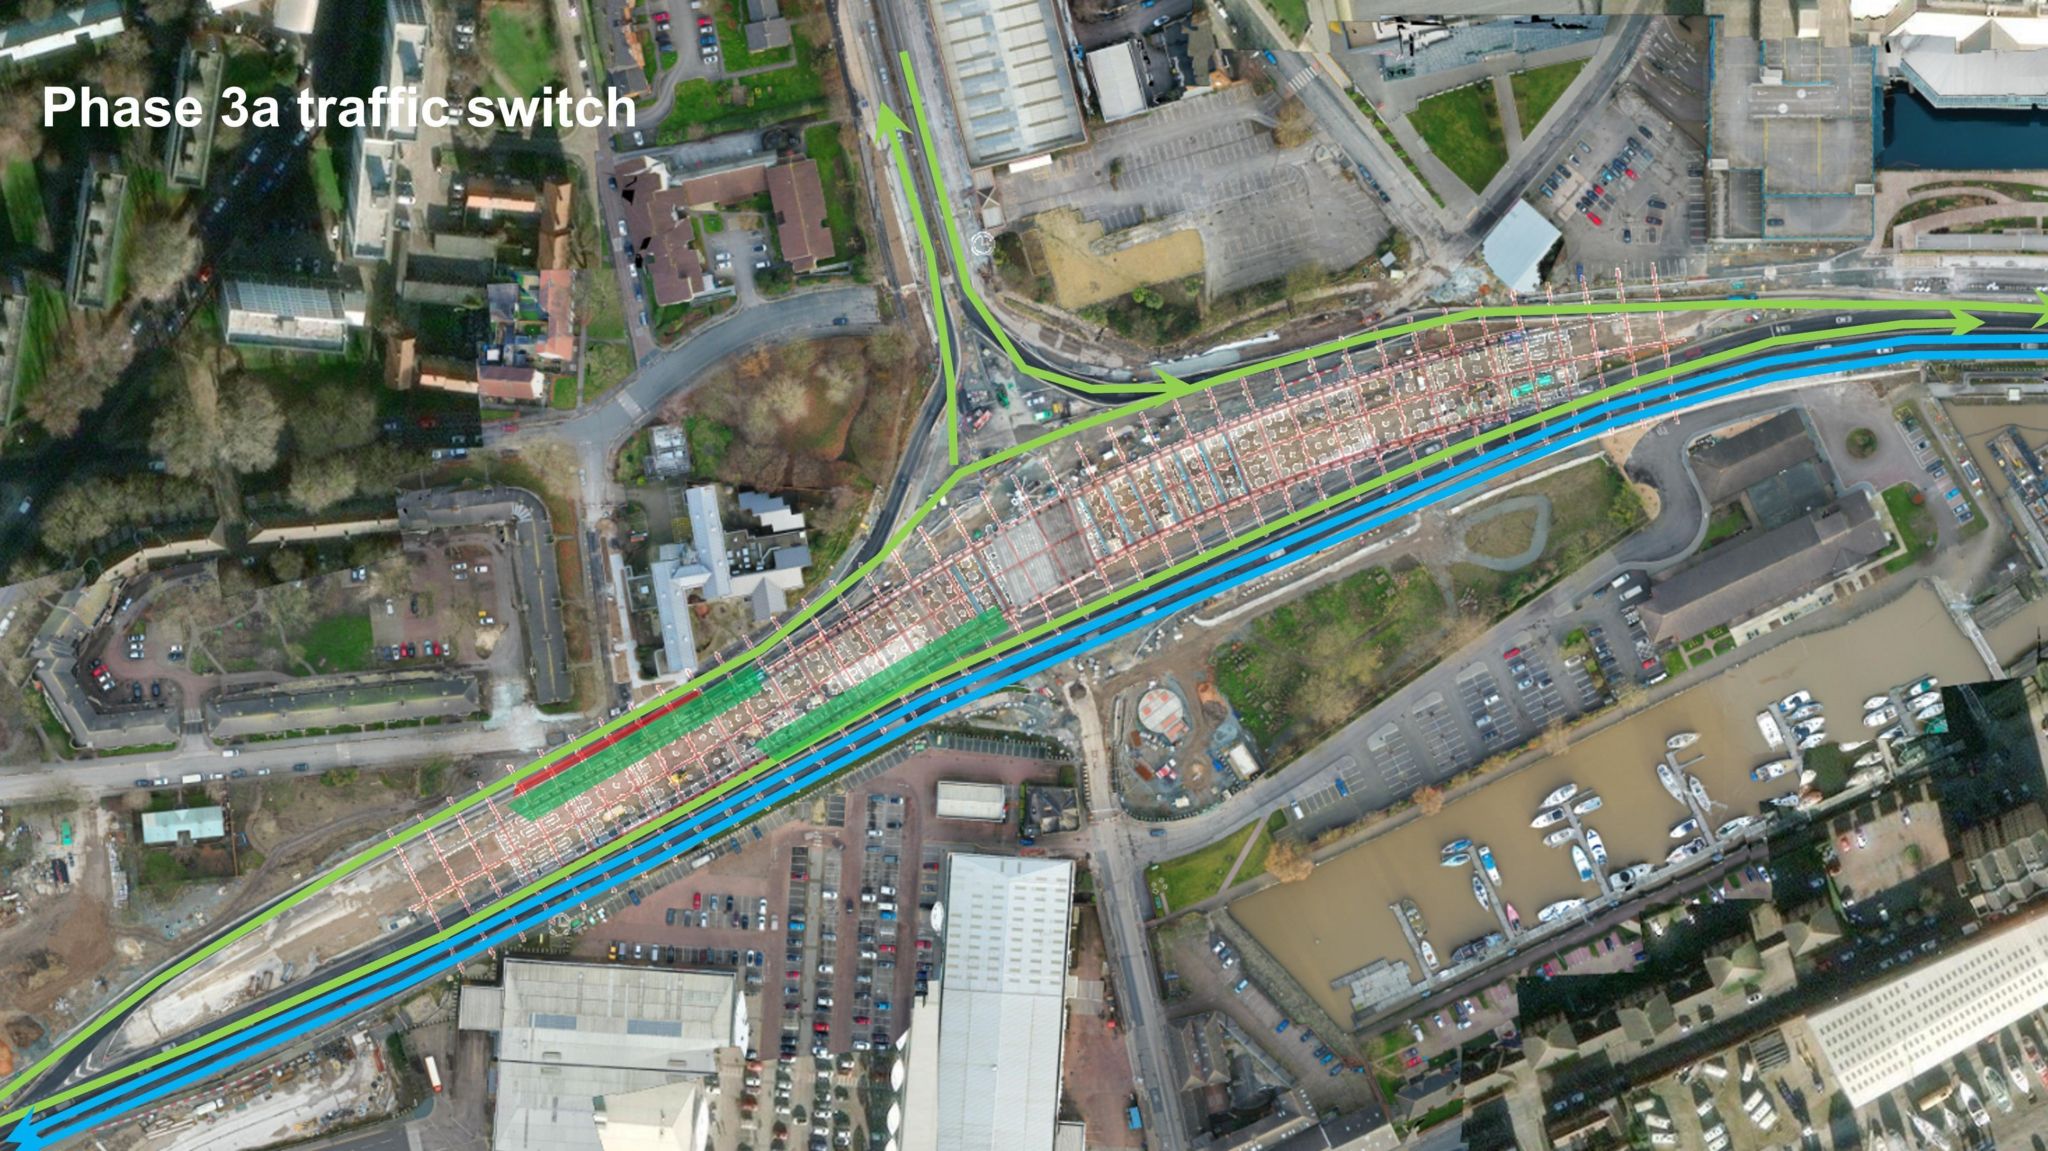 New A63 eastbound layout